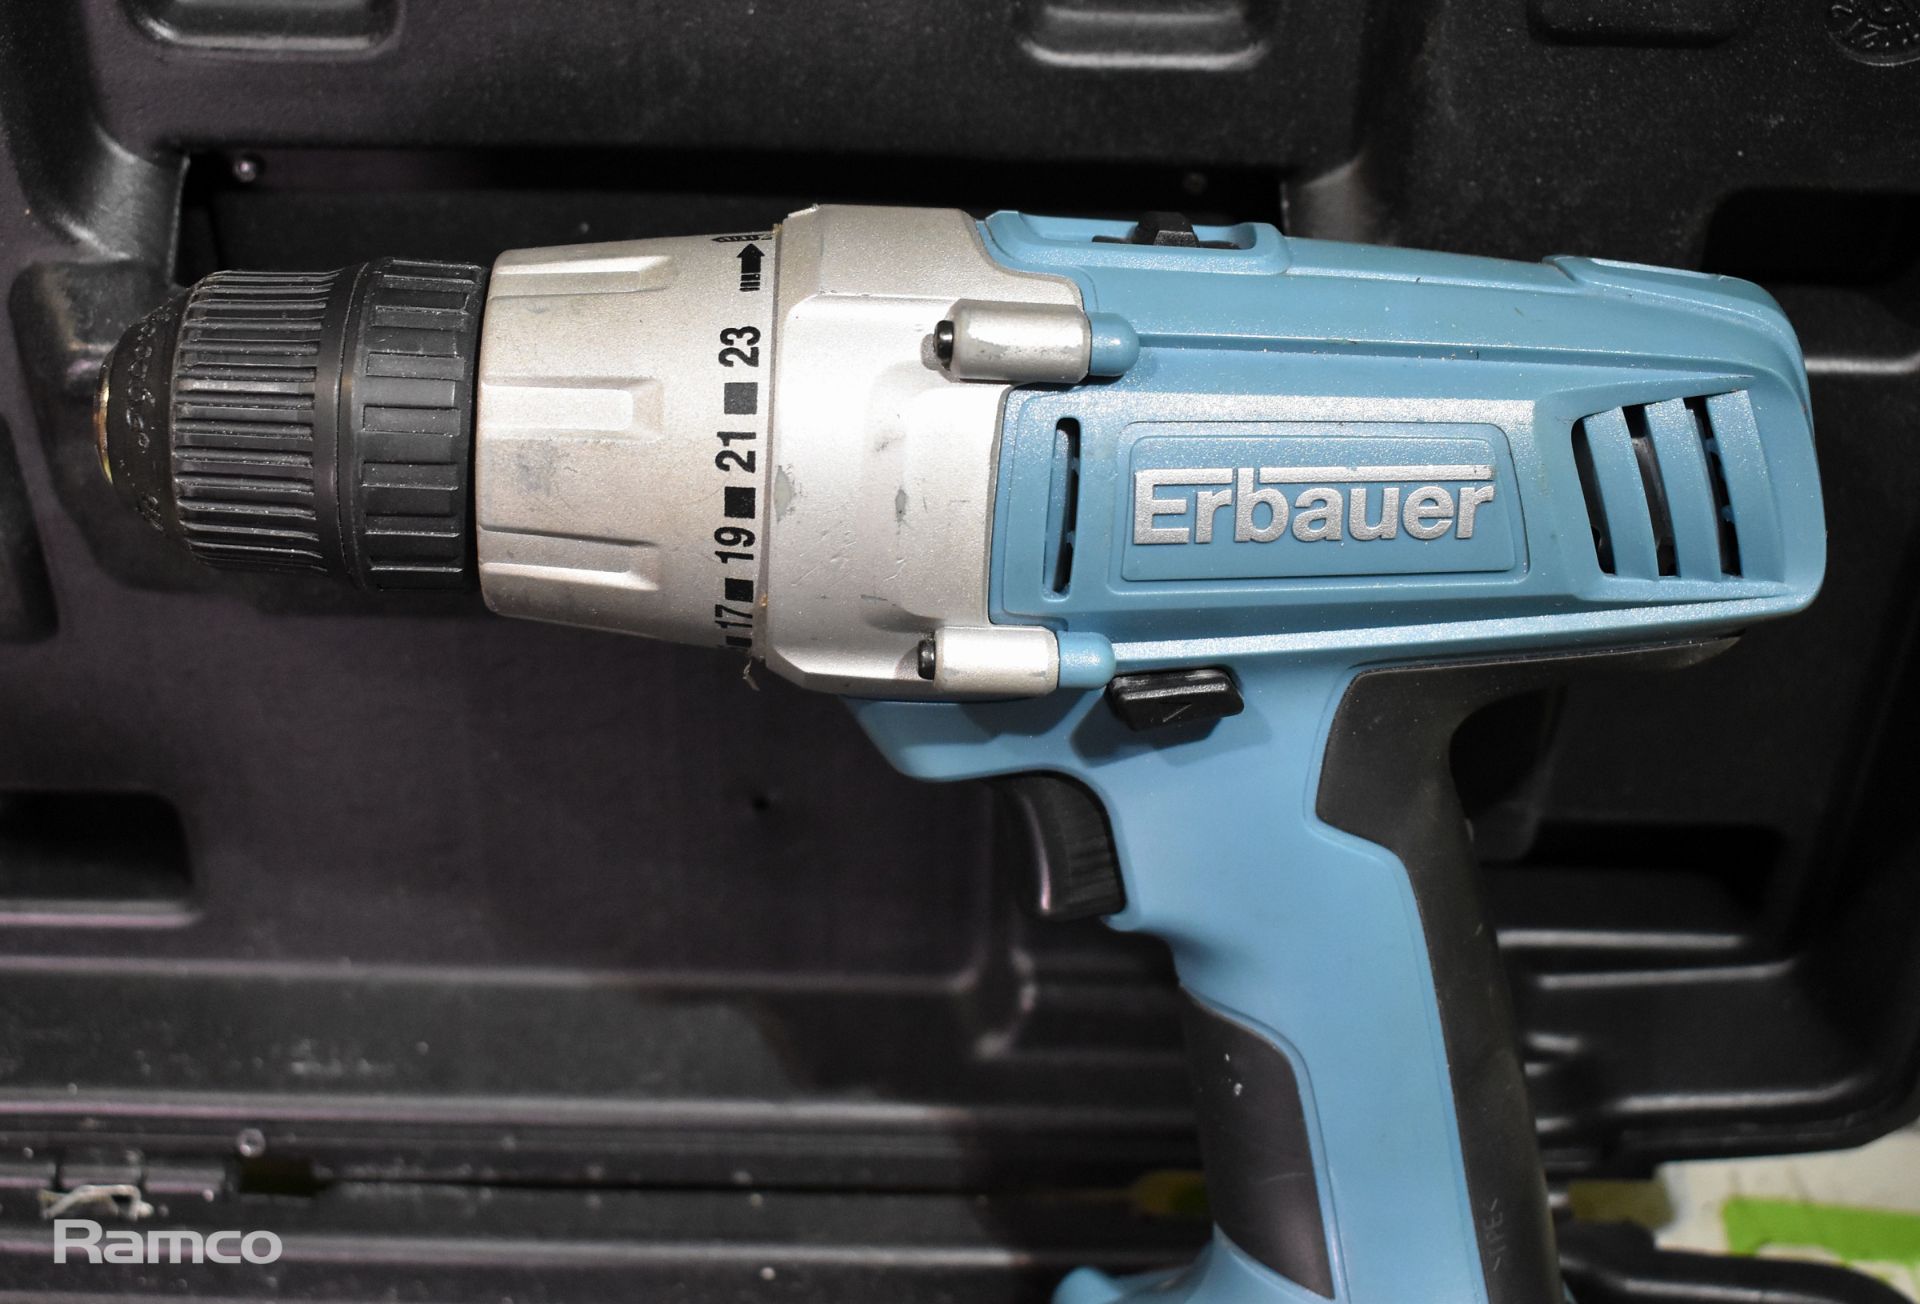 Erbauer 12V drill driver R09W16 with spare battery in carry case - NO CHARGER - Image 2 of 6